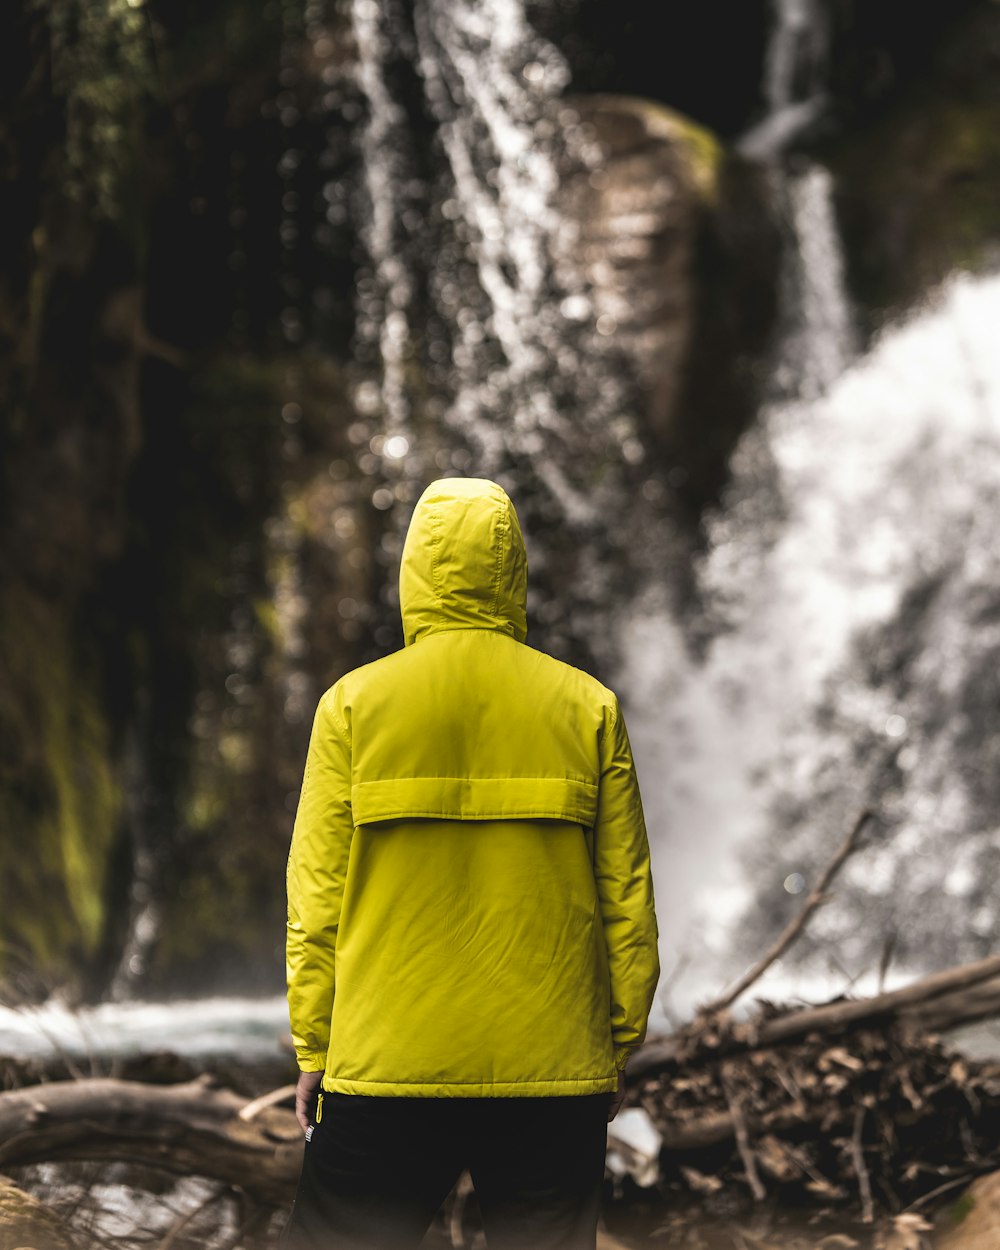 person in yellow hoodie standing near river